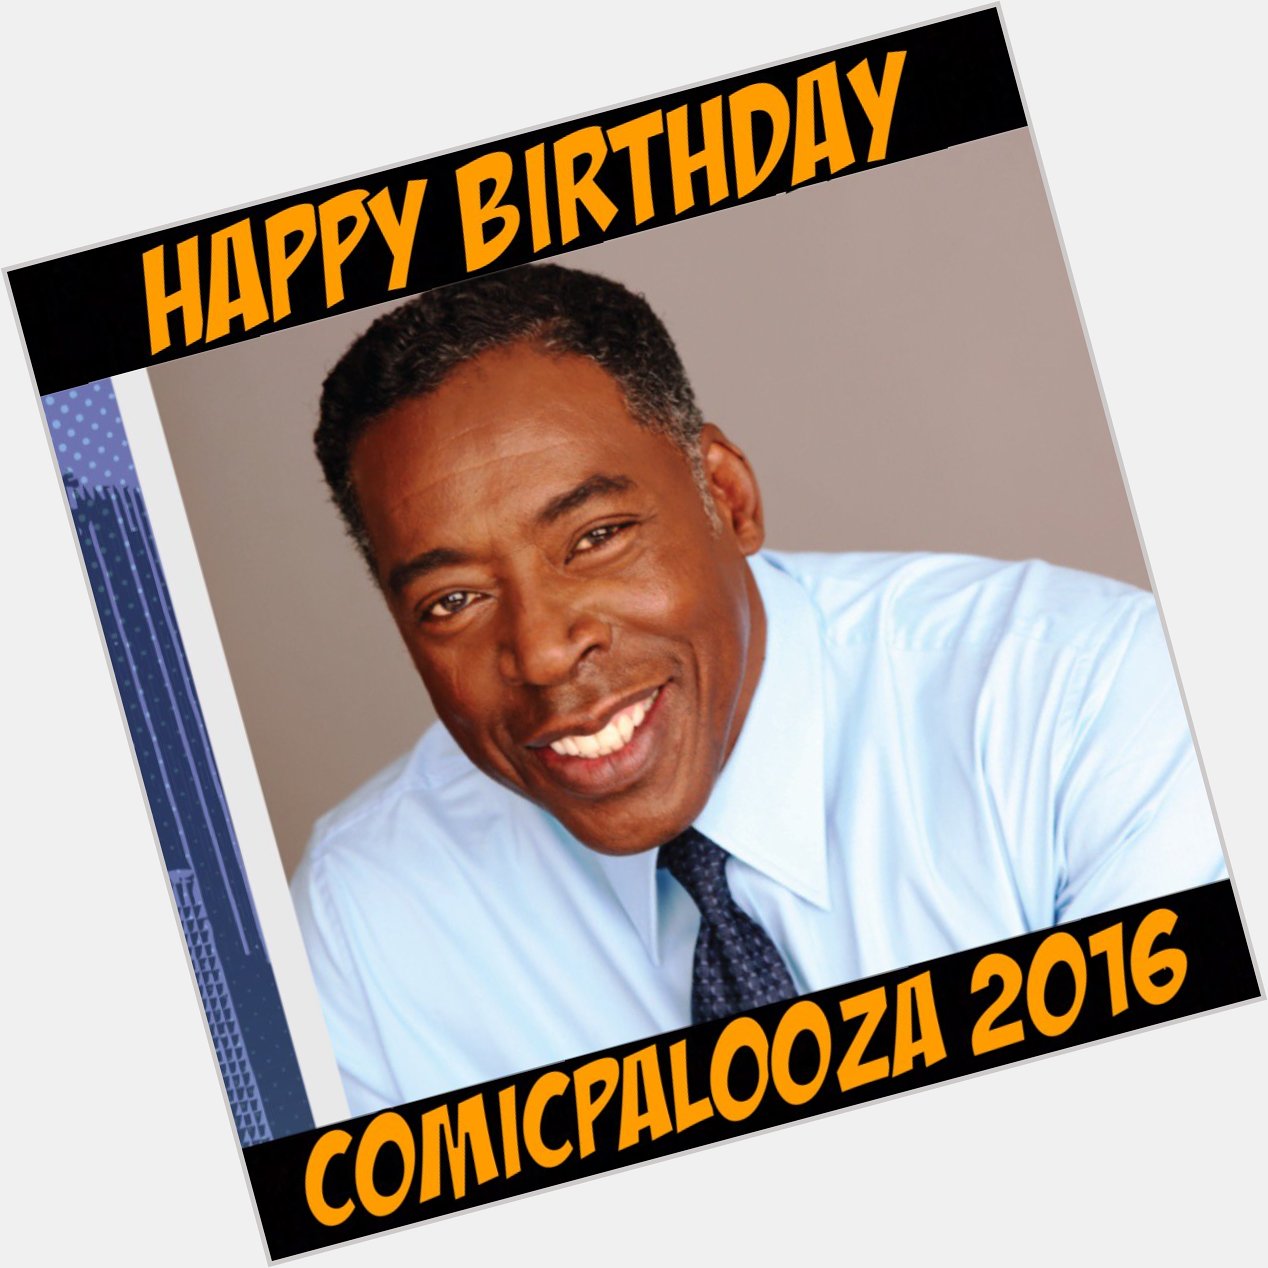 Happy birthday to our 2016 guest the one and only Ernie Hudson  